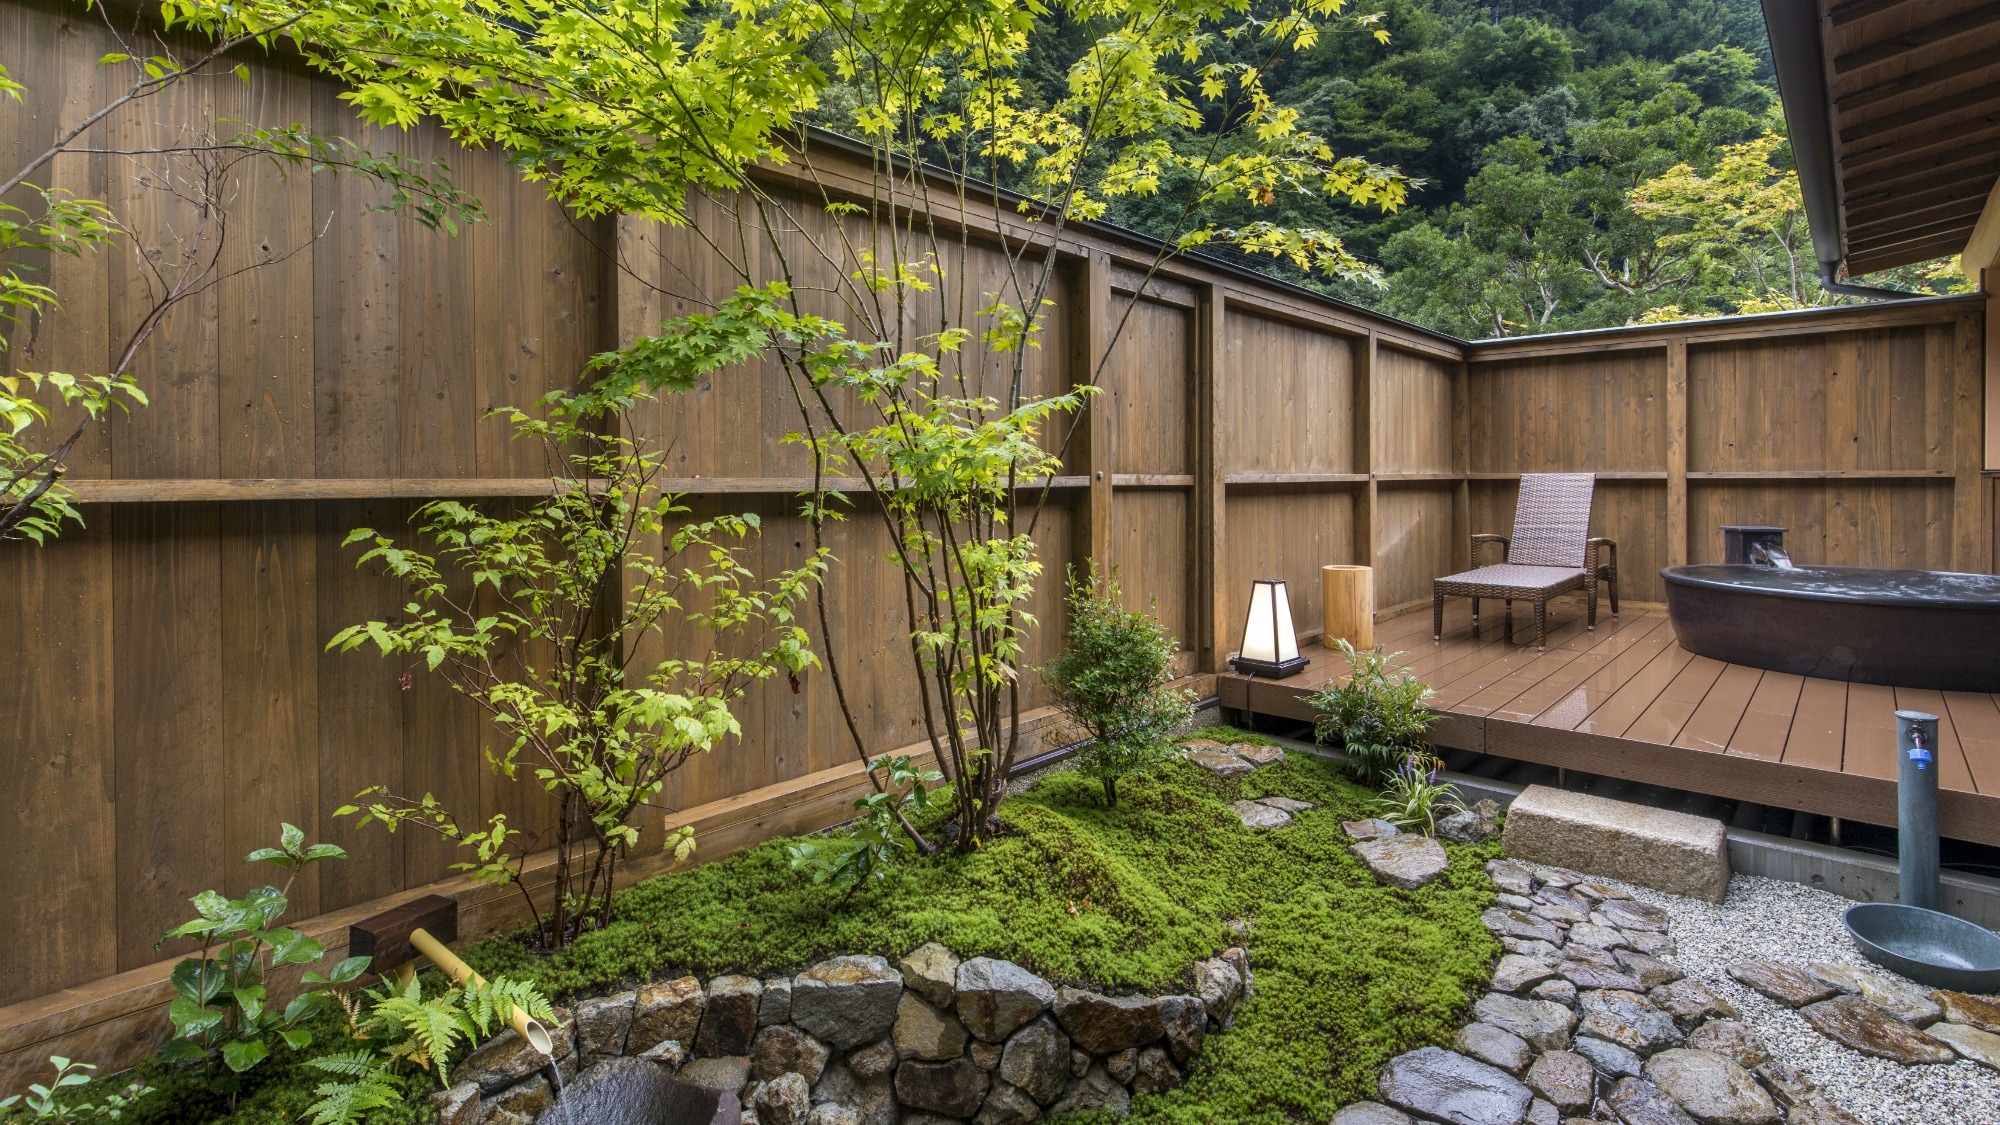 [Japanese-Western Suite] An open-air bath is set up on the wooden deck of the garden that continues from the wide edge, and the bathtub is a special bespoke item baked in Shigaraki.